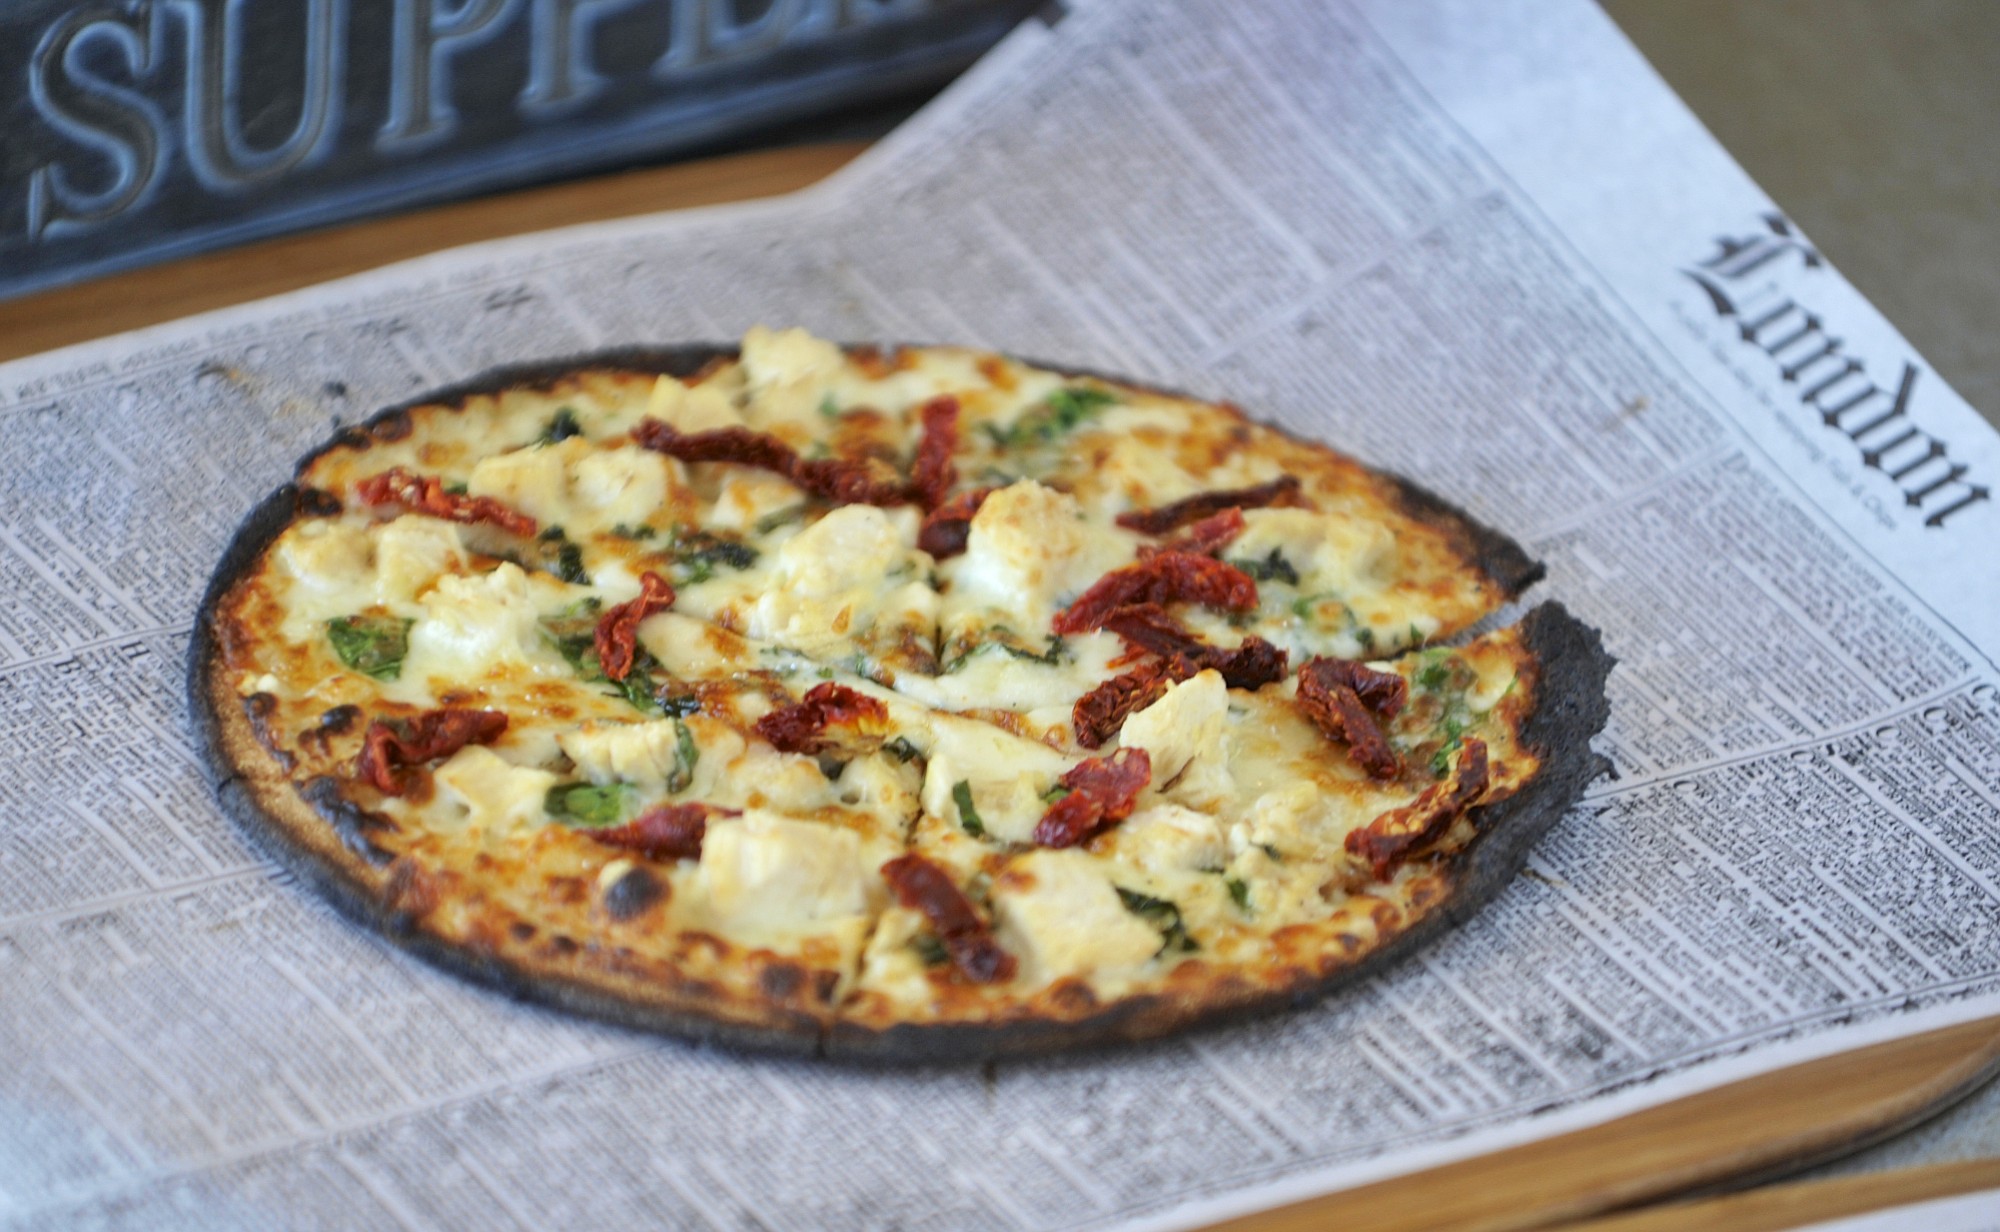 The chicken Mediterranean pizza is served July 14 at Uncle D's Wood Fired Pizza in Battle Ground.